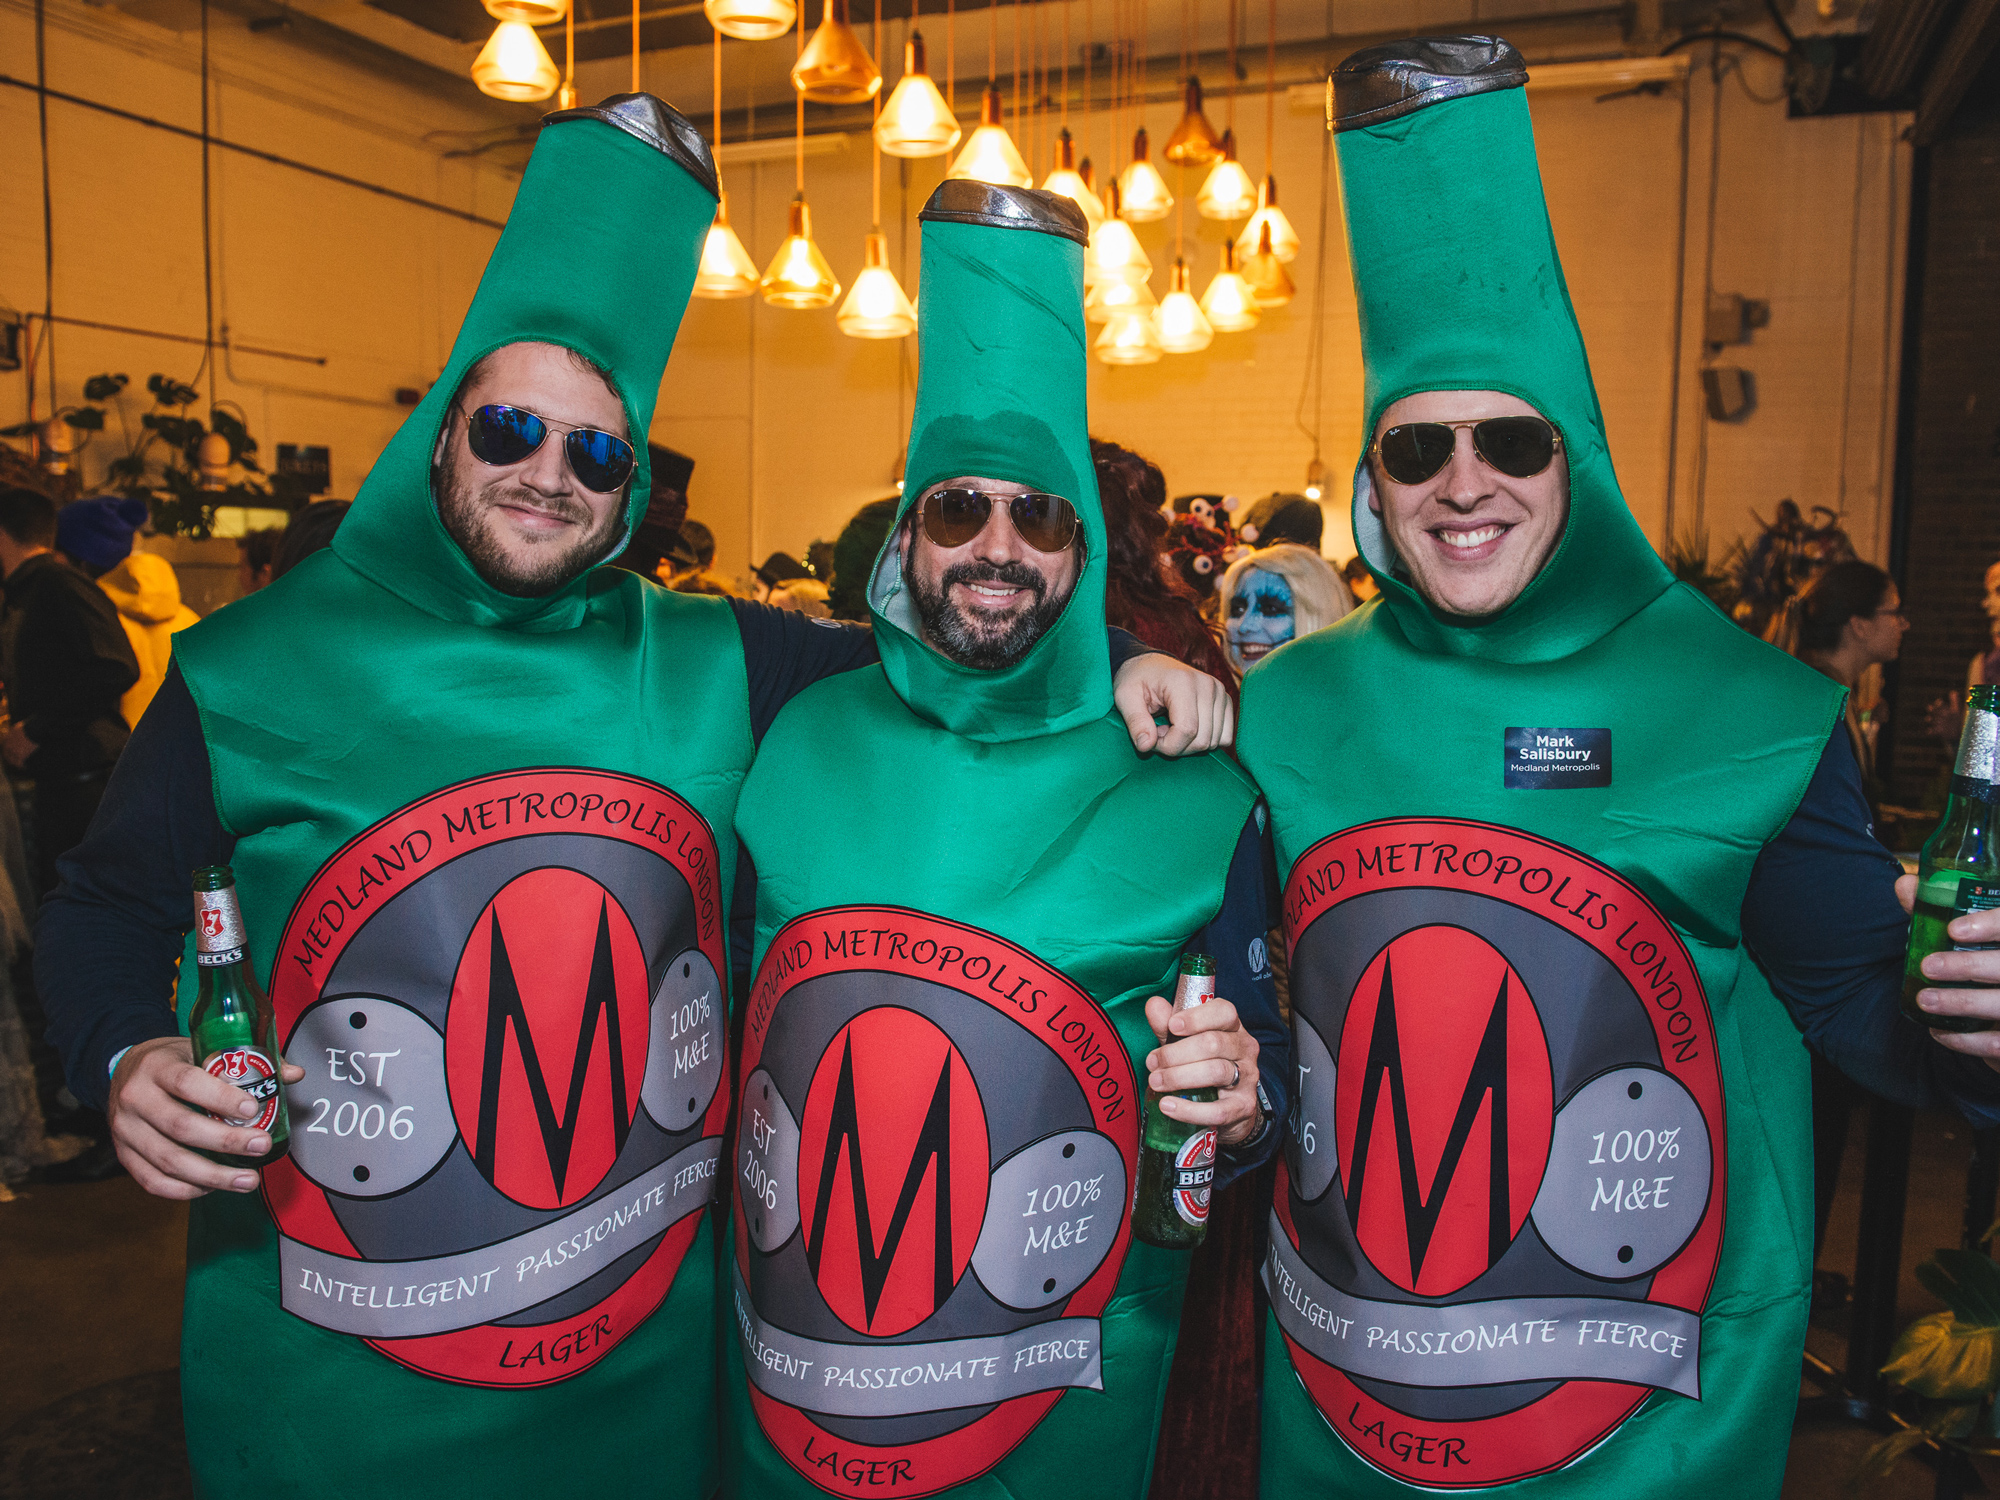 Trio dressed as beer bottles with the Midland Metropolis London logo, enjoying a jovial moment at a social event.